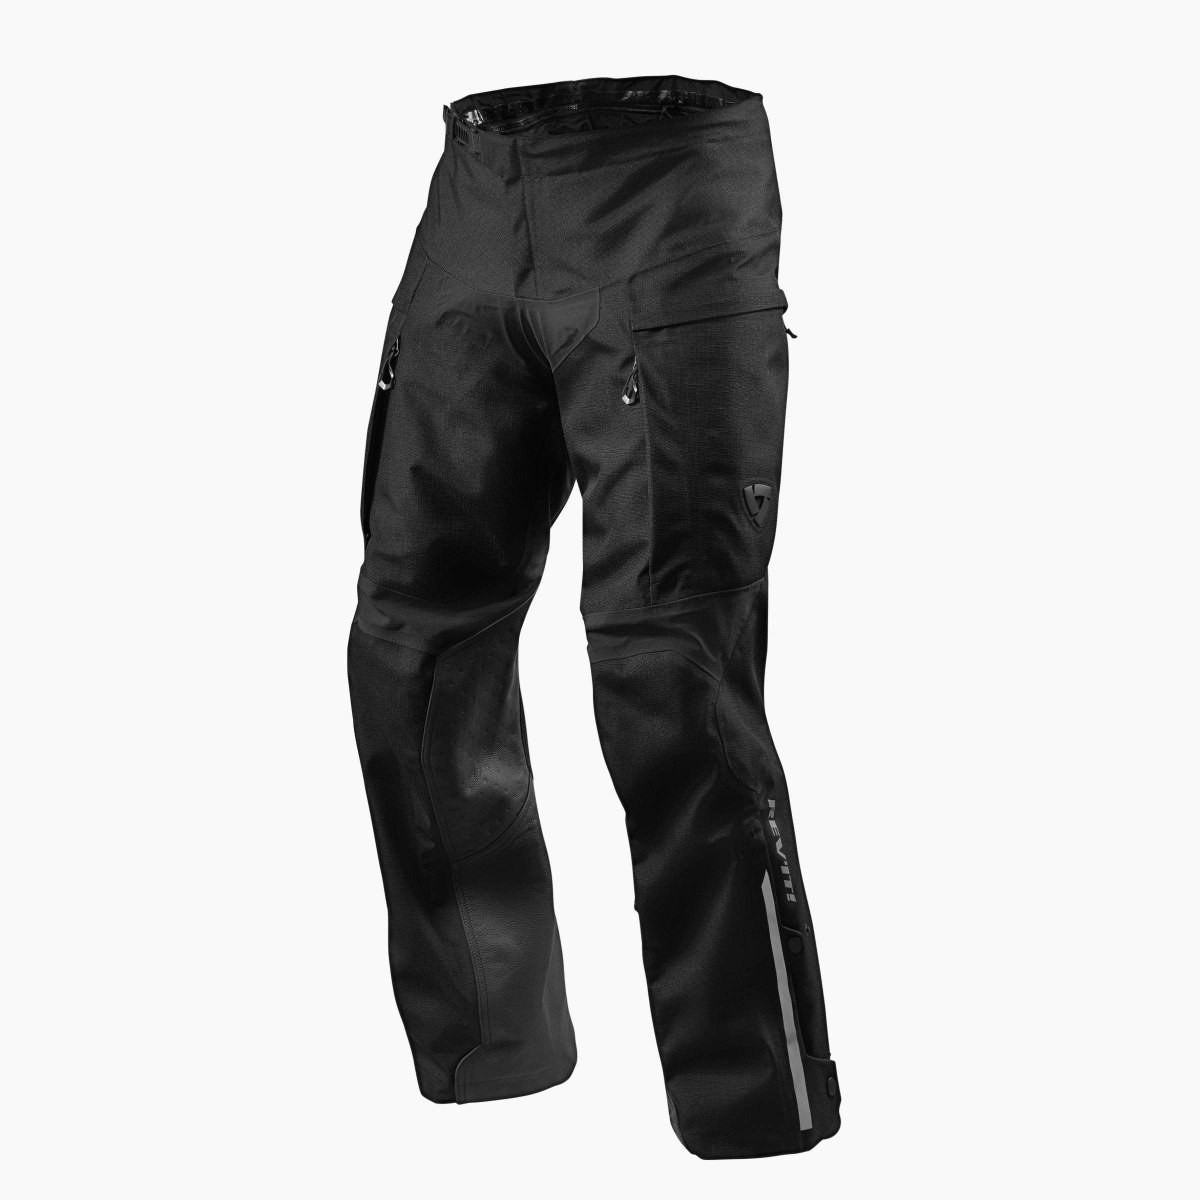 Image of REV'IT! Component H2O Standard Black Motorcycle Pants Talla M